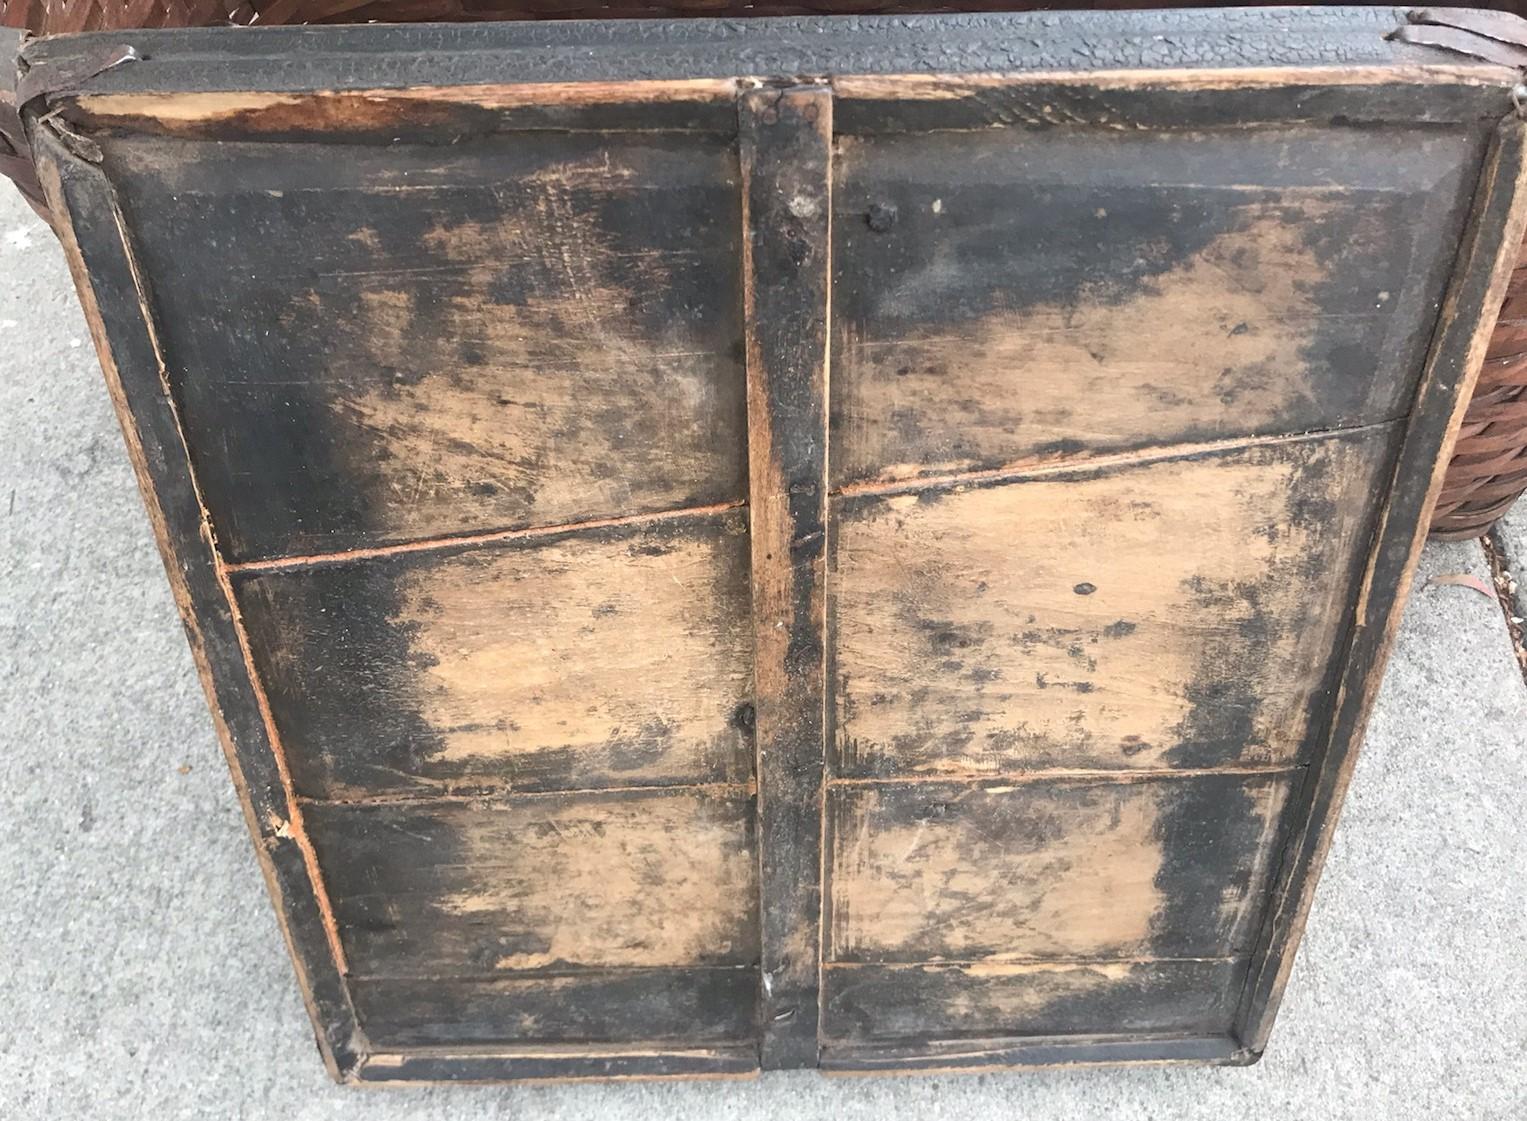 used bakery trays for sale